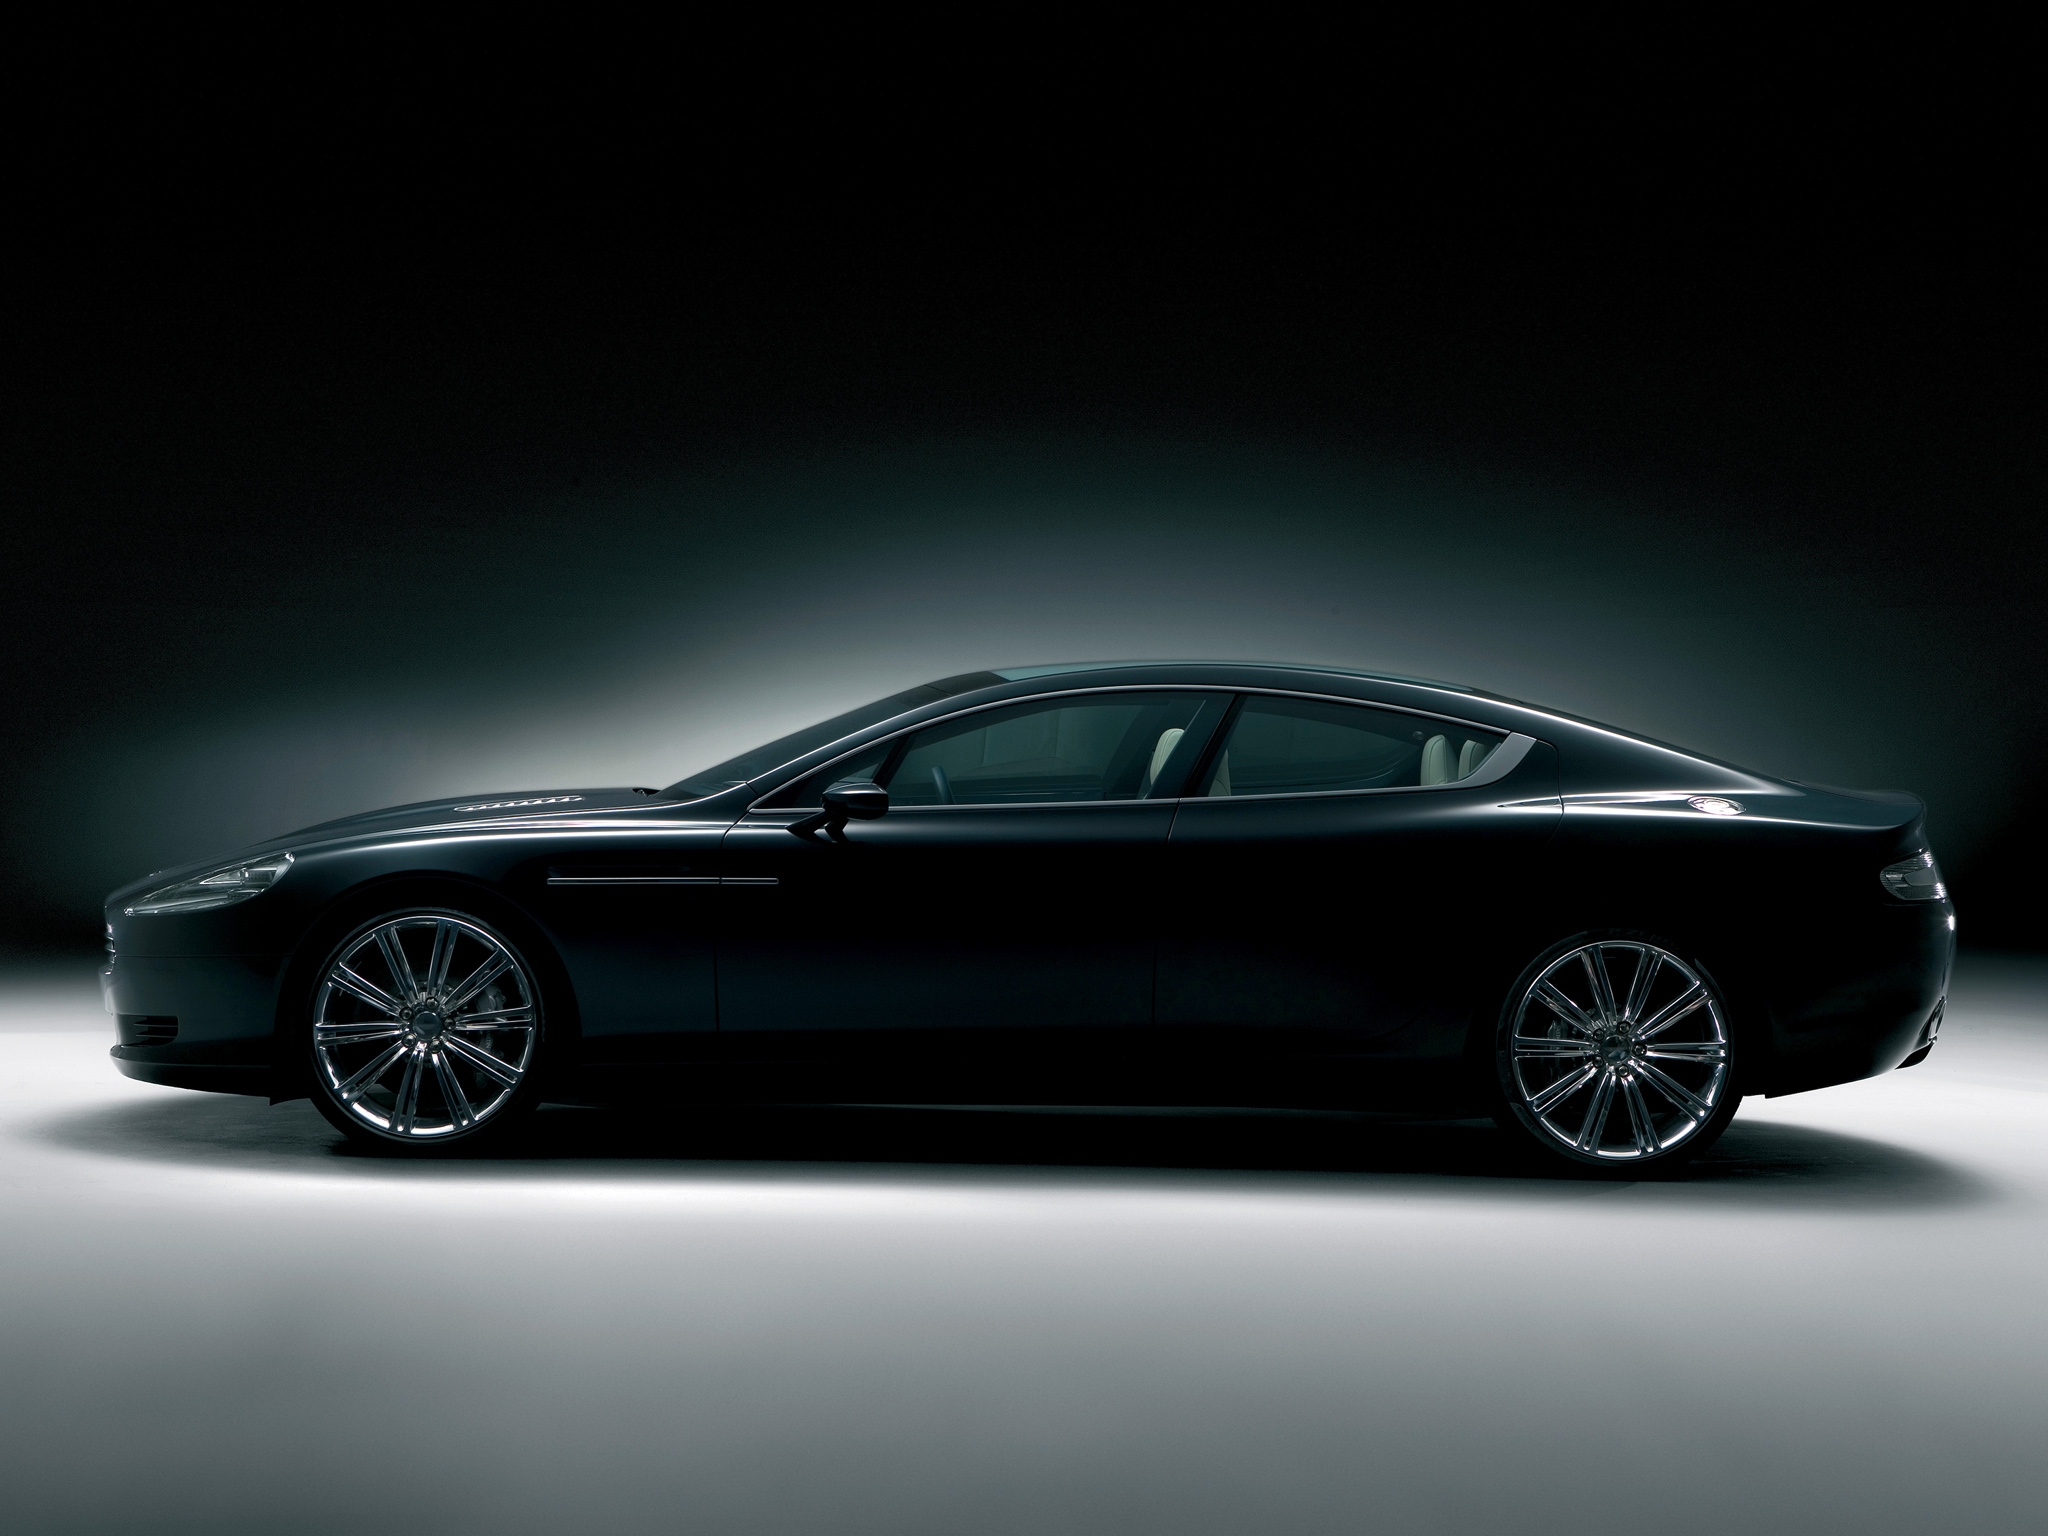 rapide, black, cars, side view Full HD